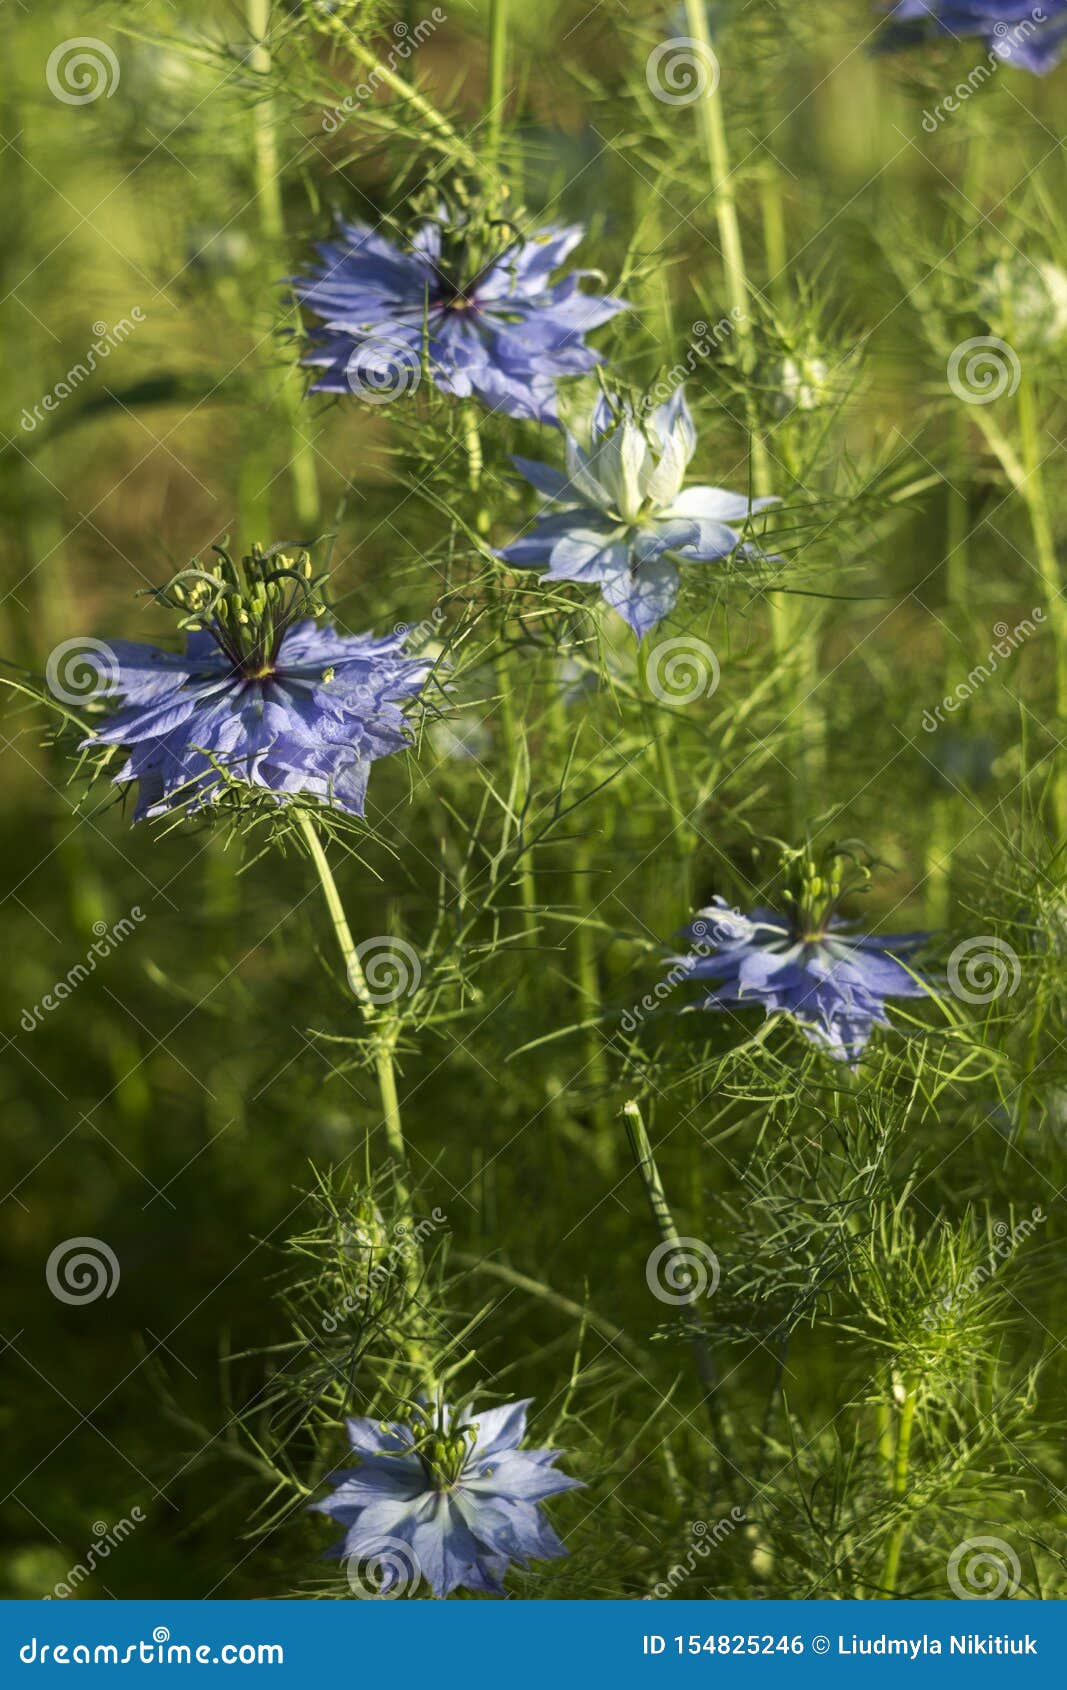 Nigella Sativa Flower With Blue Flowers Love In A Mist Summer Herb Plant With Different Shades Of Blue Flowers On Small Green Stock Photo Image Of Blue Flower 154825246